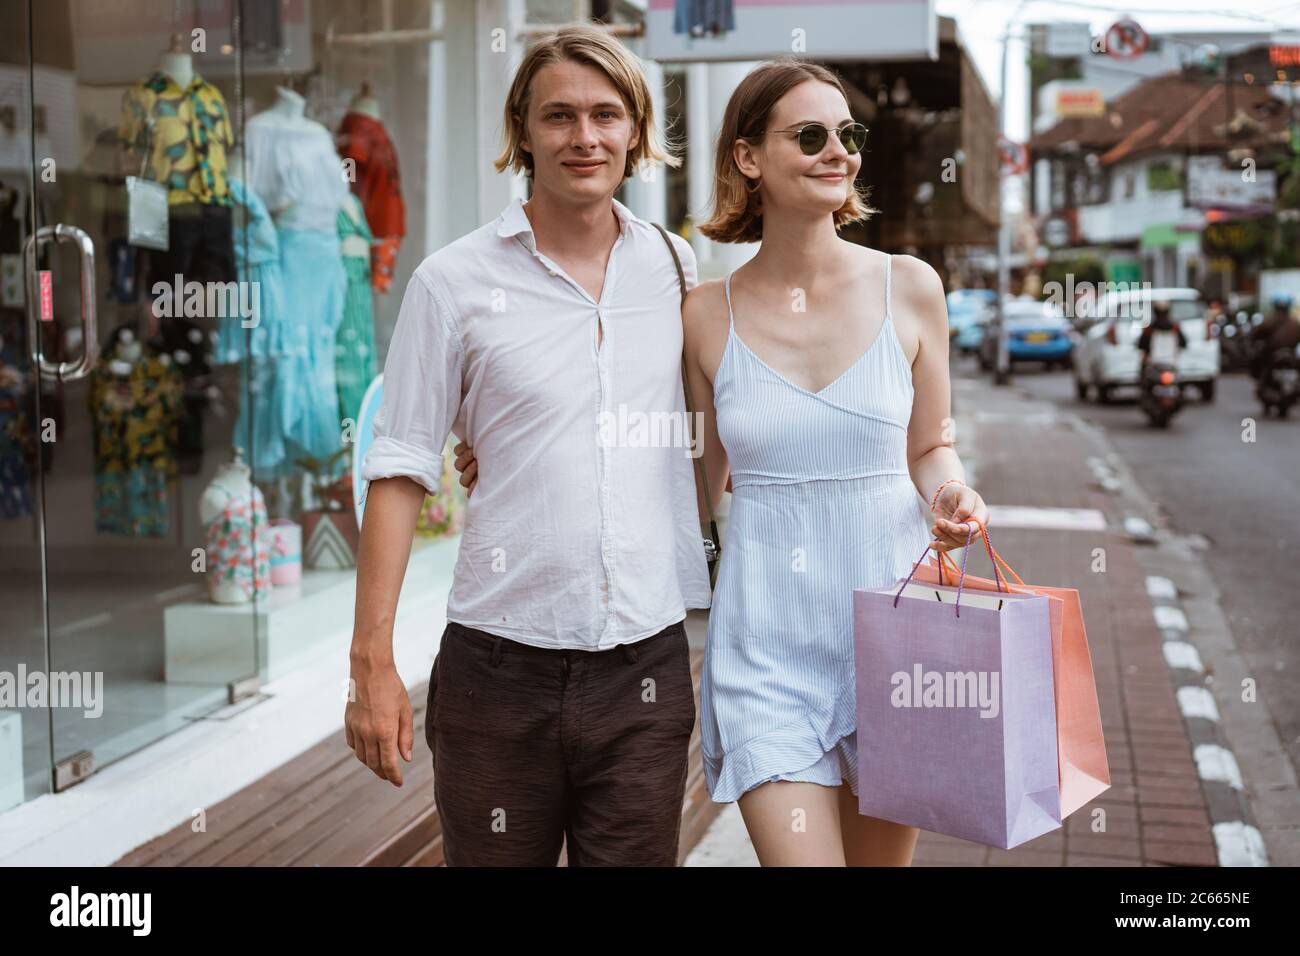 summer holiday of a attractive tourist couple walking on shopping centre in asia Stock Photo